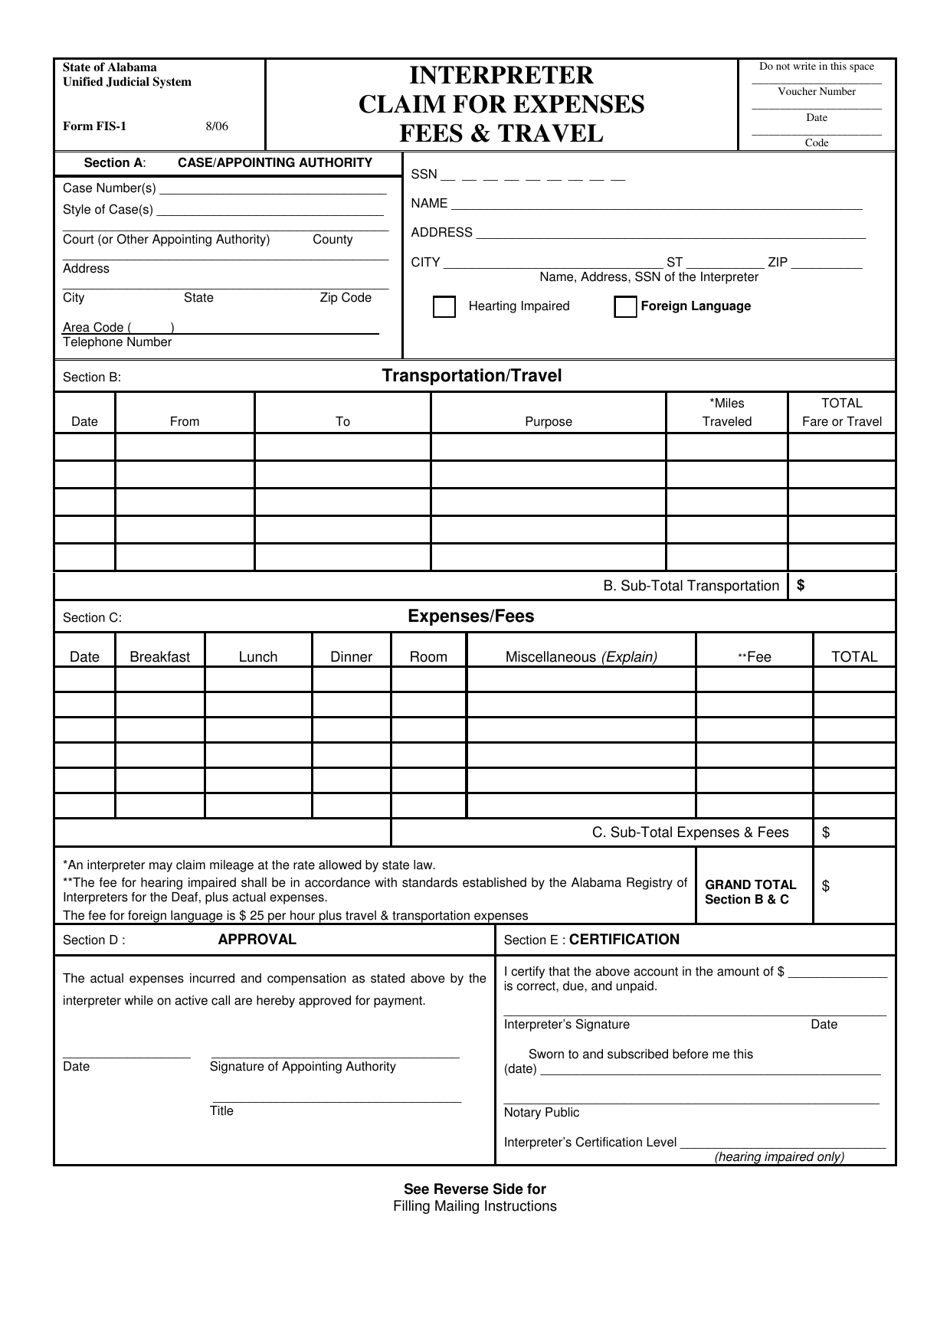 Form FIS-1 Interpreter Claim for Expenses Fees  Travel - Alabama, Page 1